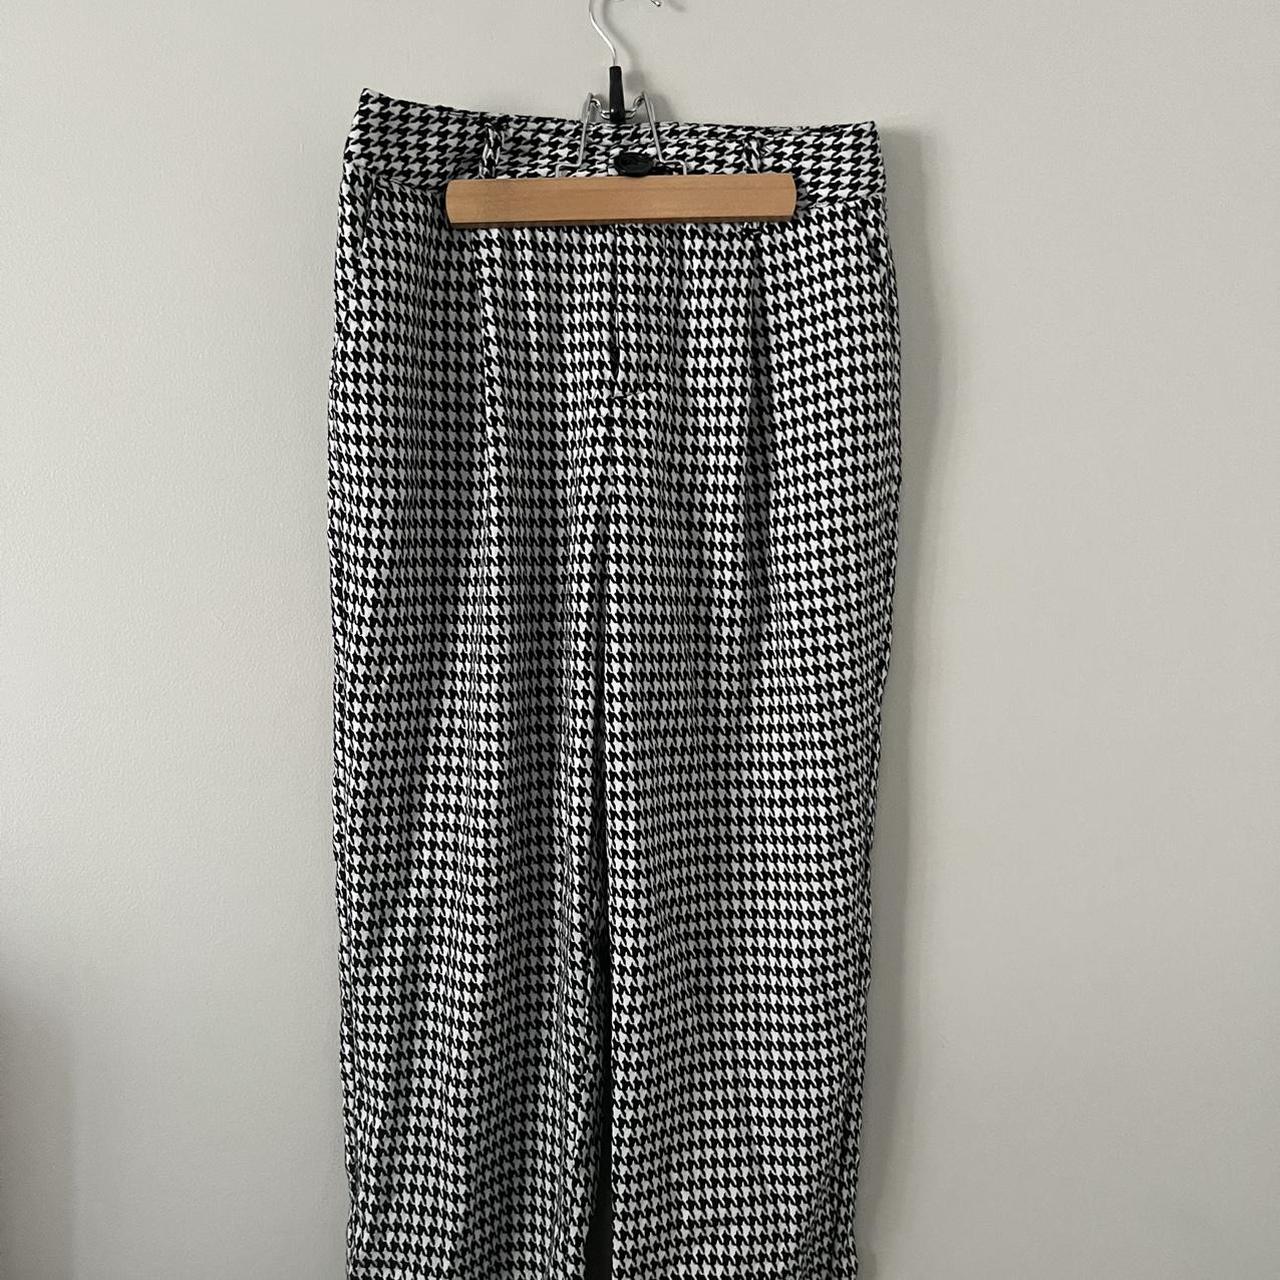 Product Image 1 - Houndstooth pattern pants 

- Size